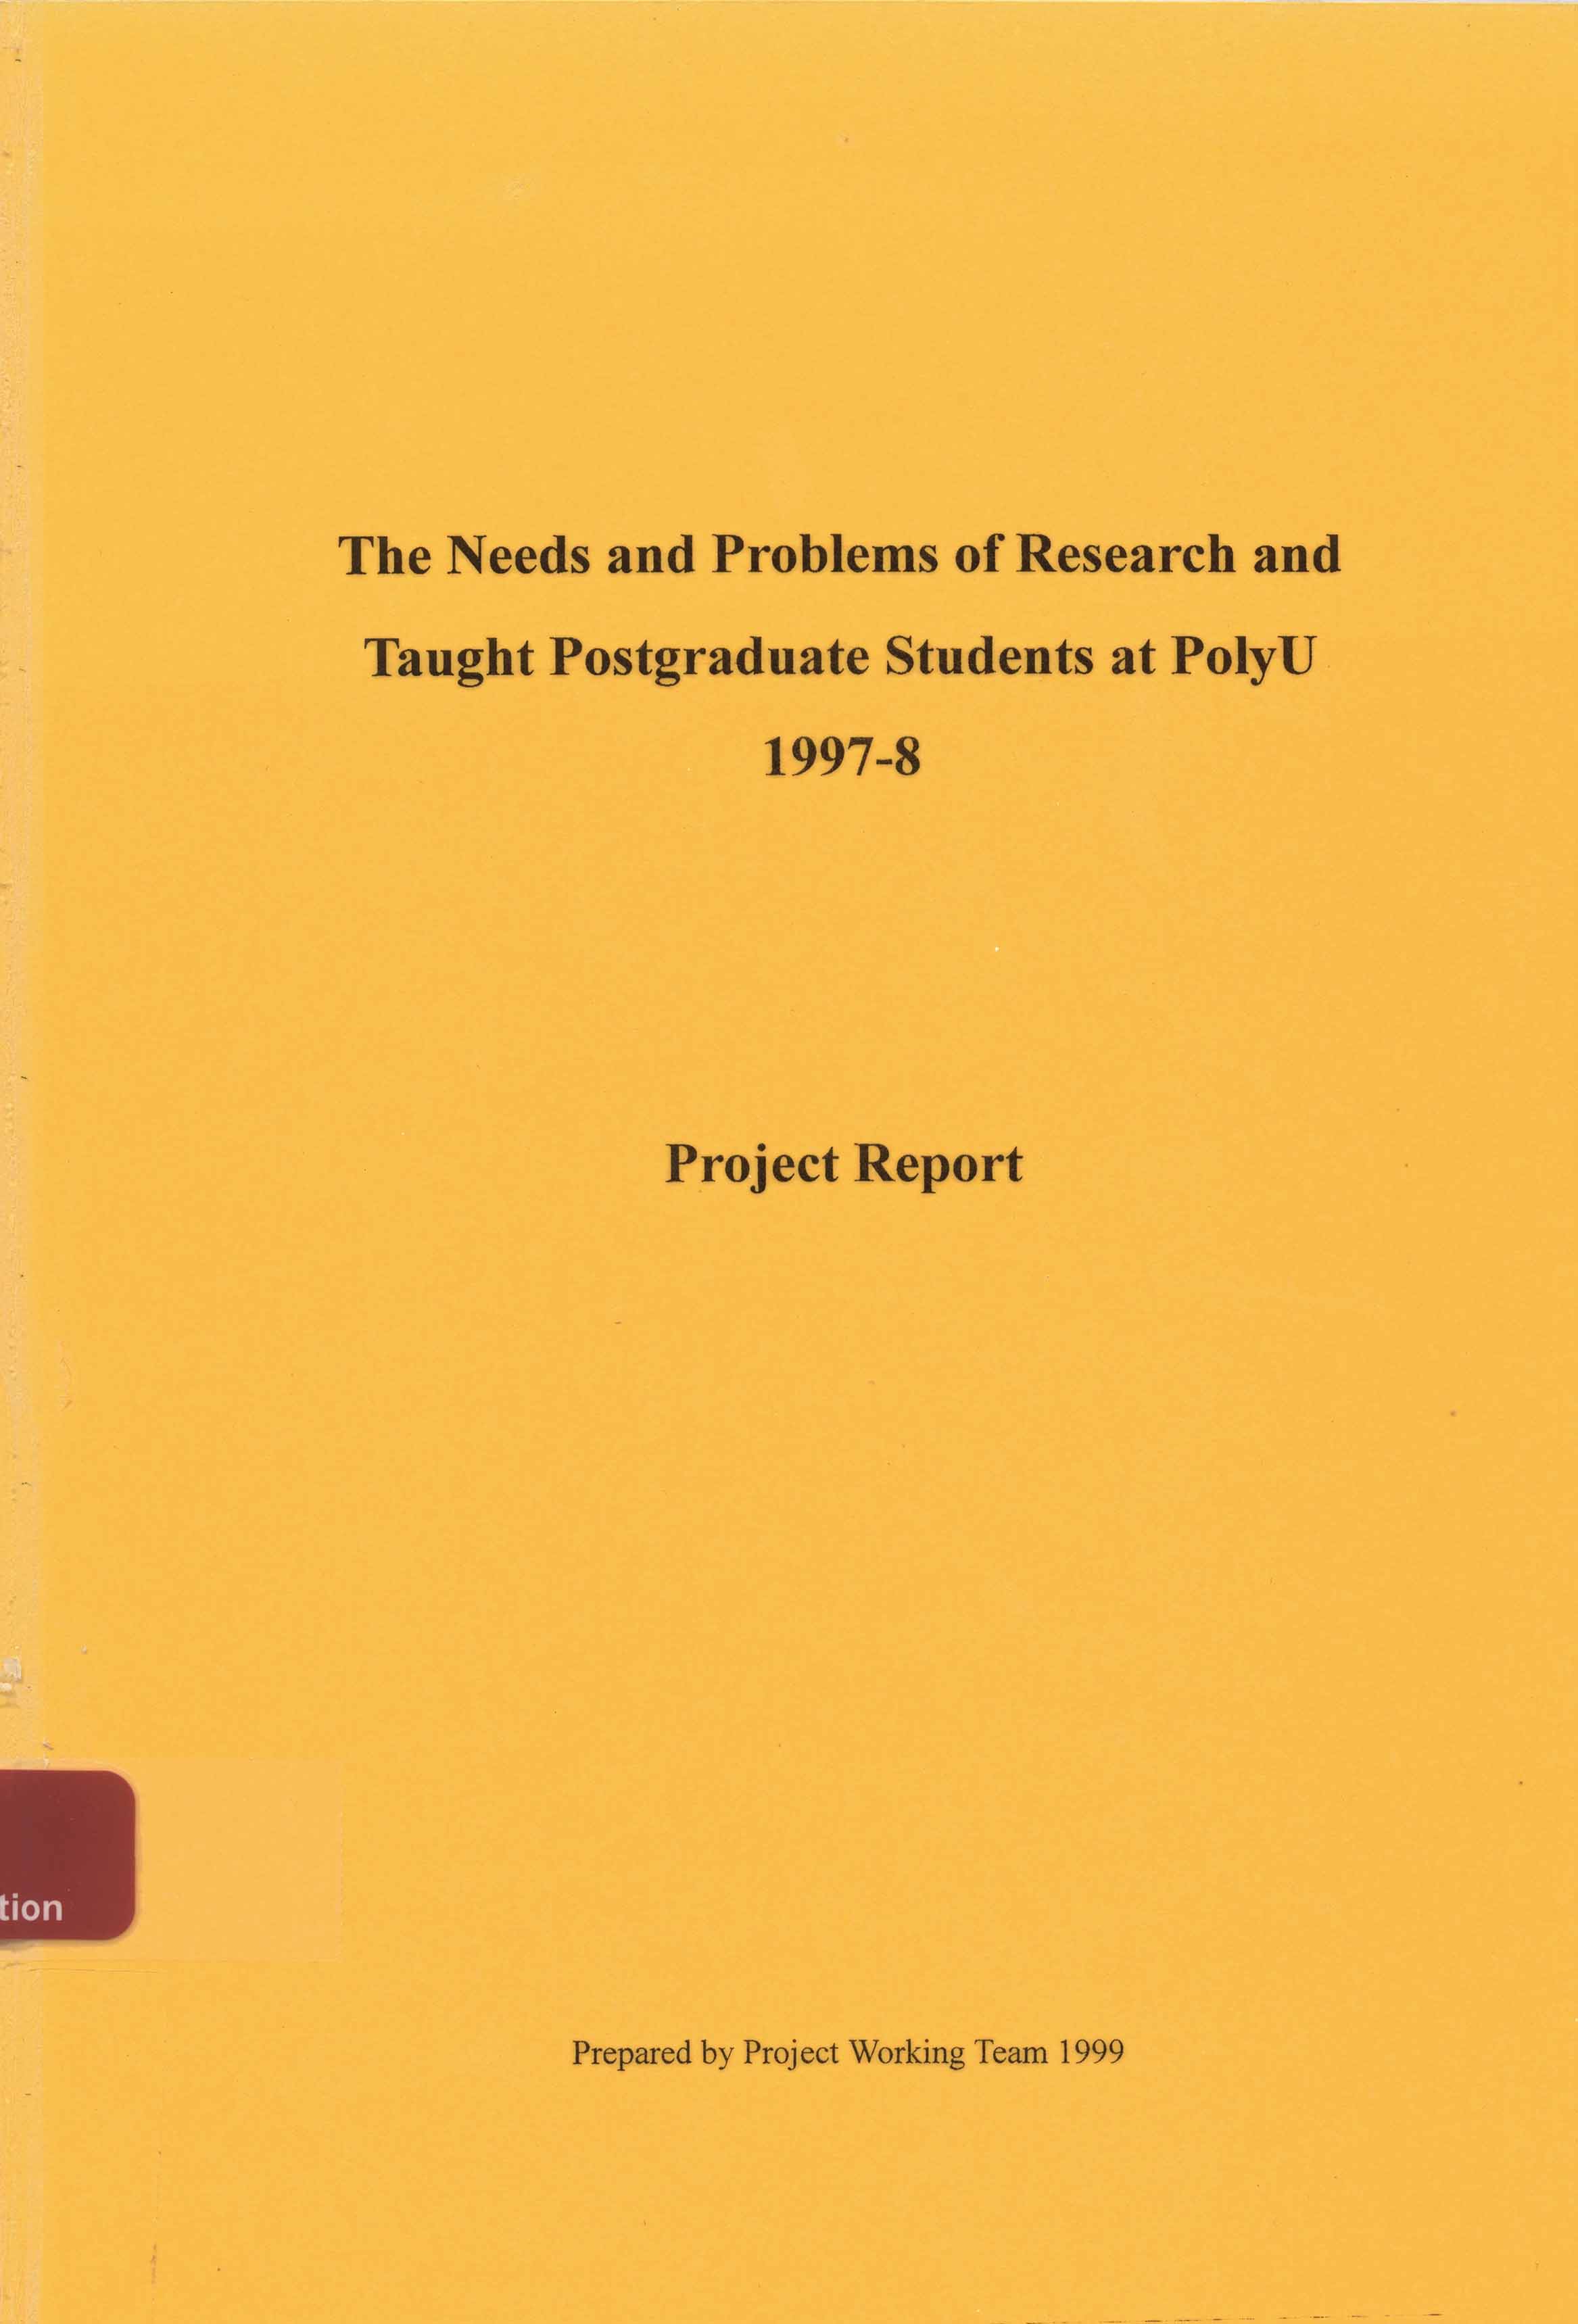 The Needs and problems of research and taught postgraduate students at PolyU 1997-8 : project report